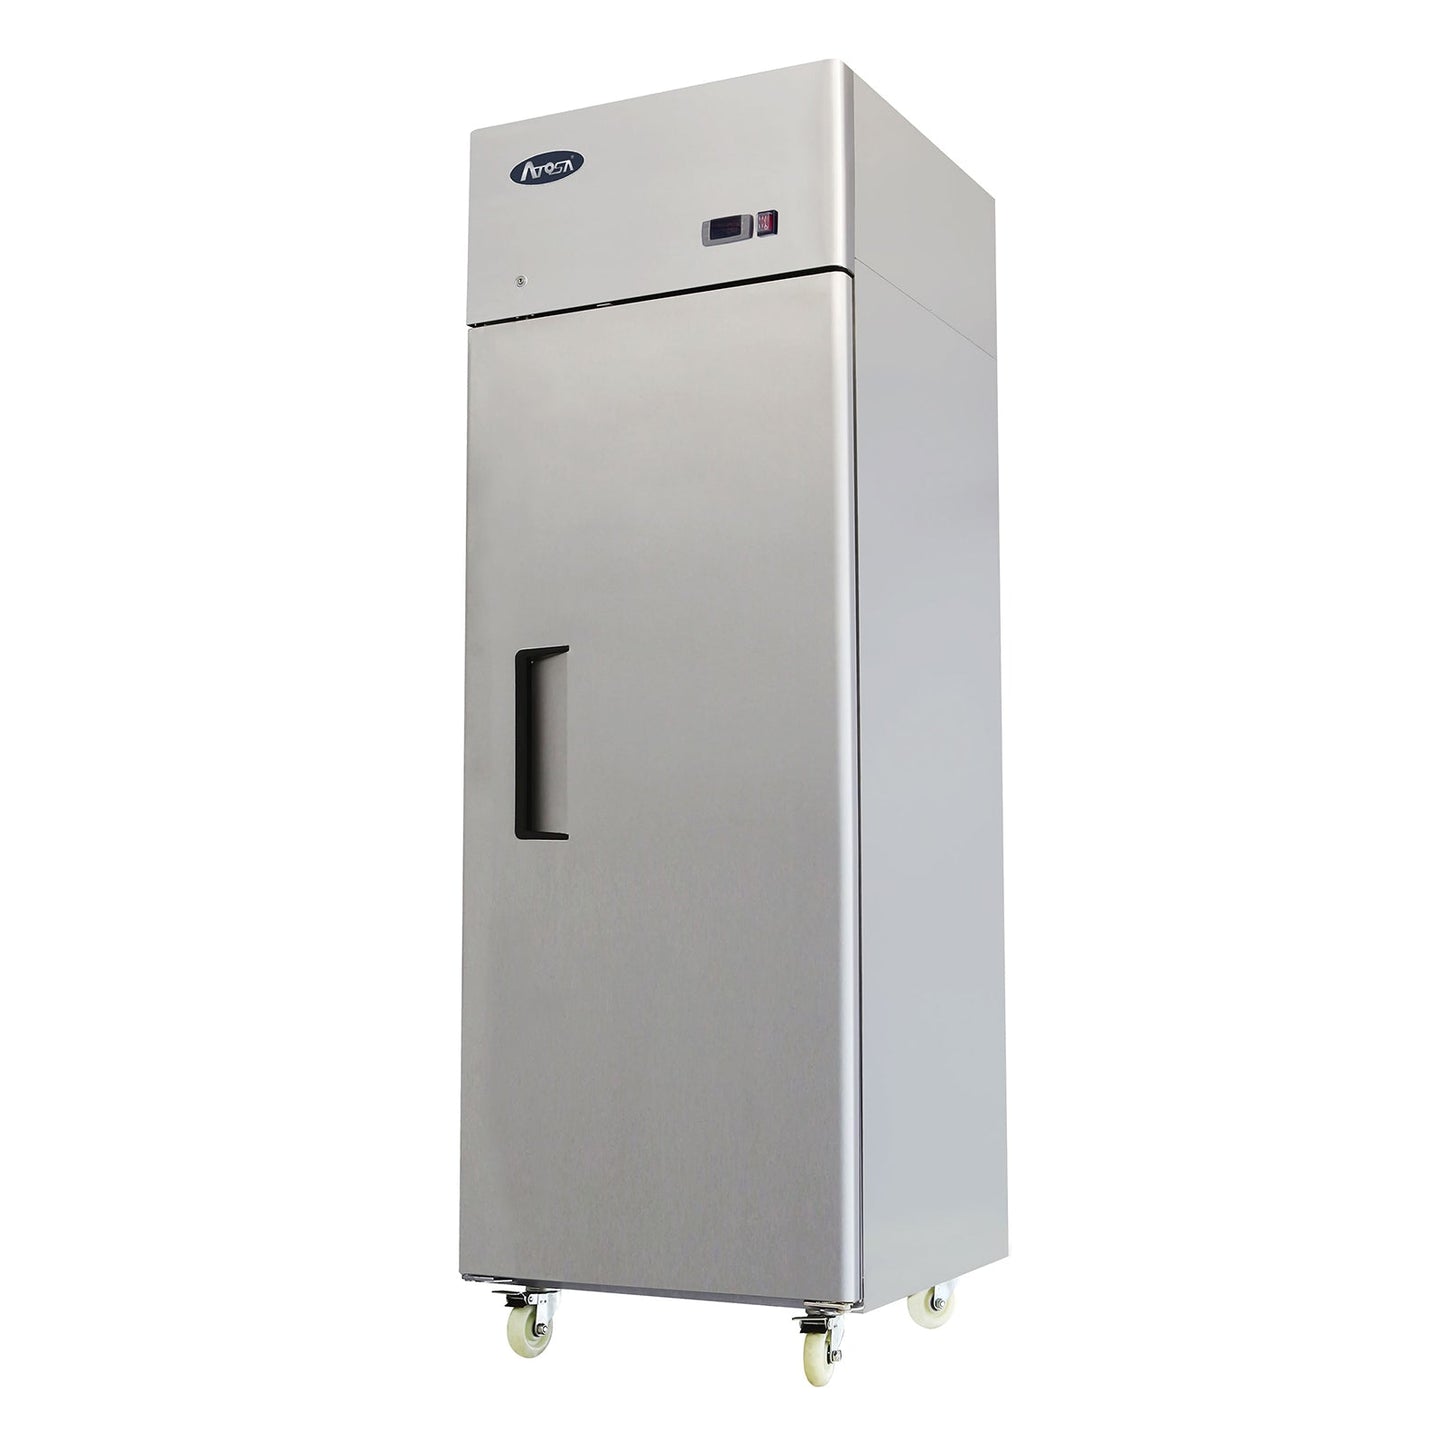 Atosa One-section Reach-in Freezer, 28-7/10"W x 31-7/10"D x 81-3/10"H, (MBF8001GR)